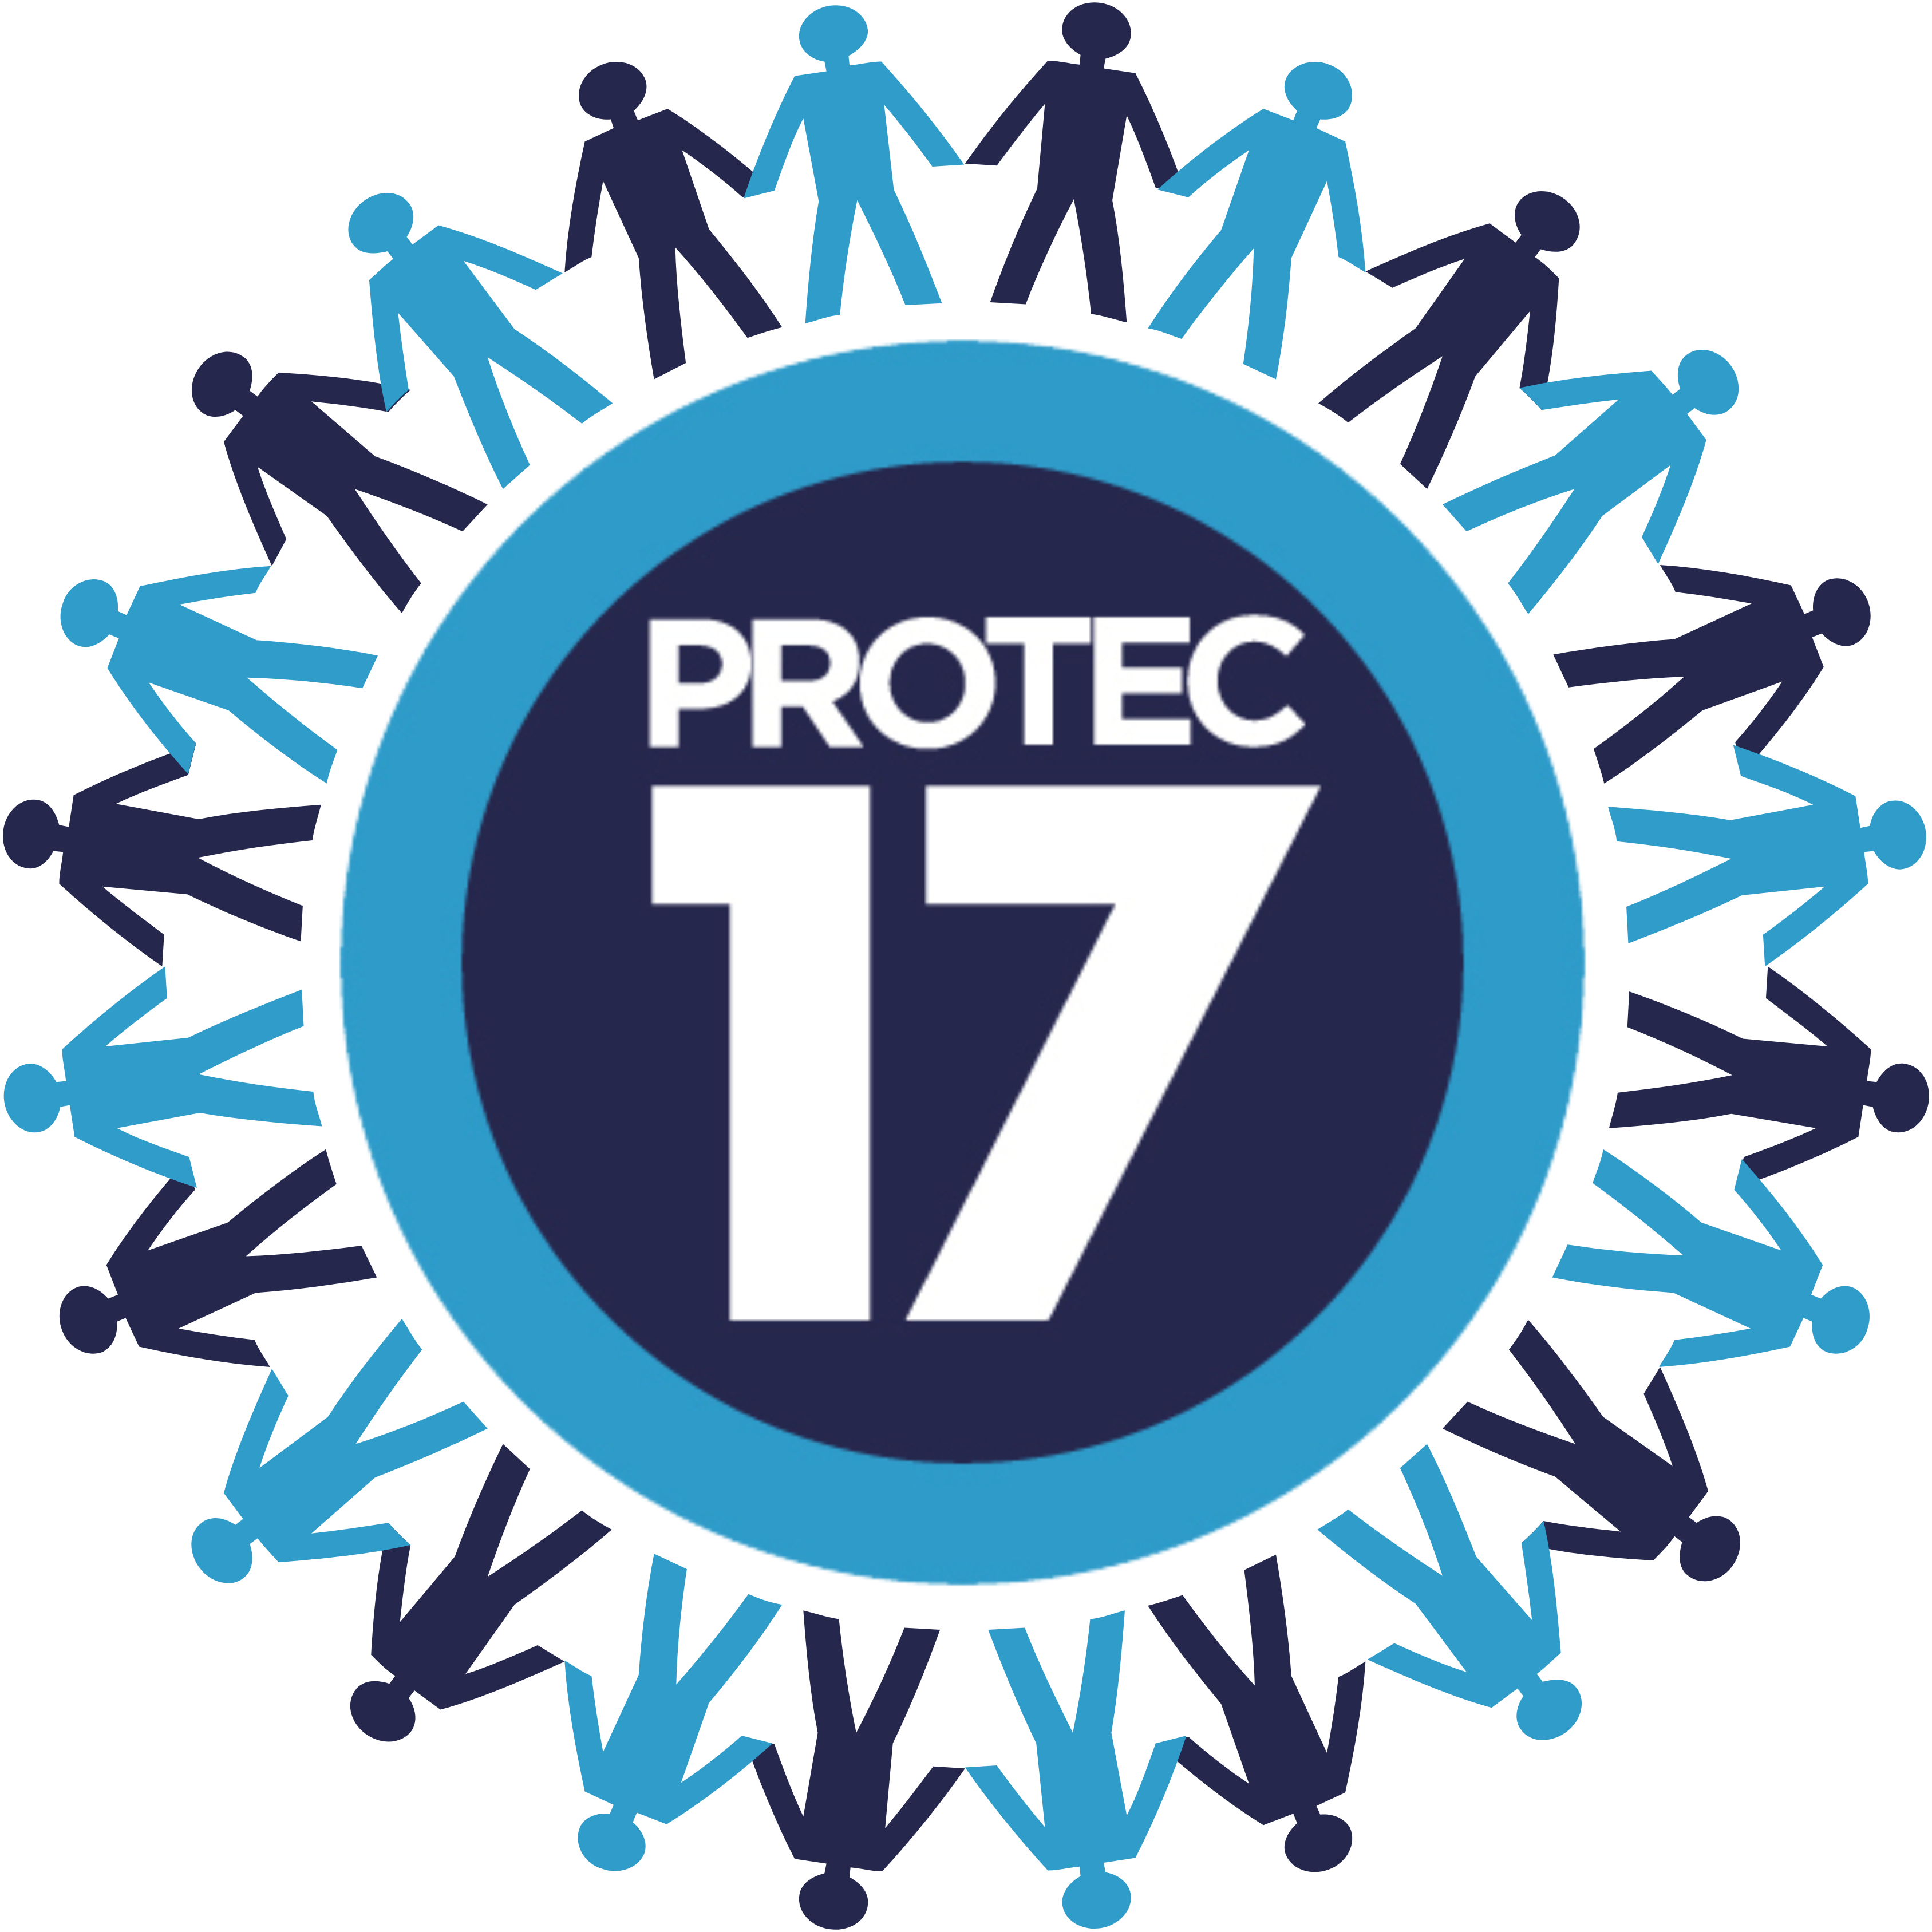 The logo for the Solidarity Summit is shown. It is the PROTEC17 logo with different colored people holding hands and standing around the circumference of the logo.